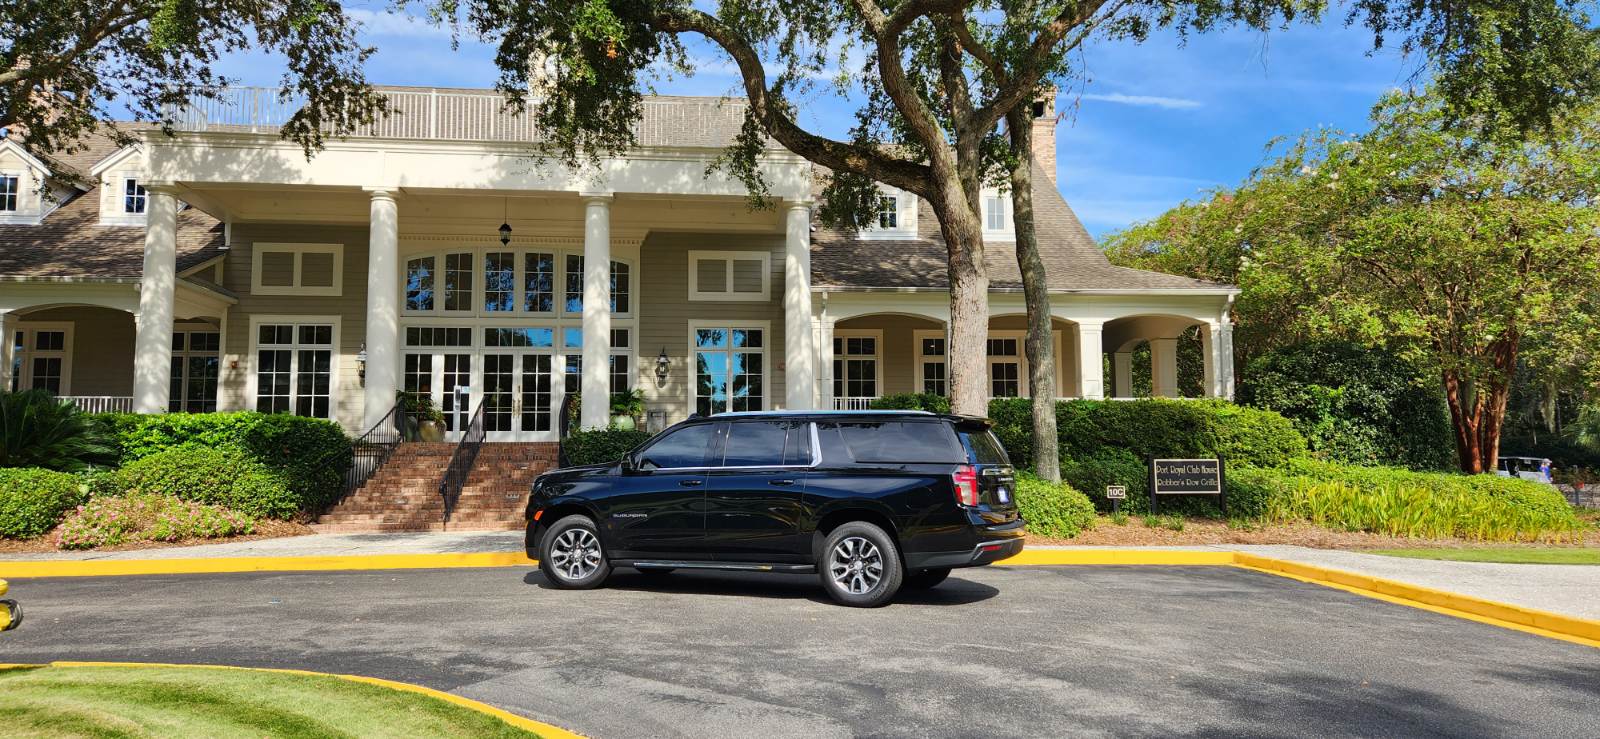 Reliable Airport Shuttle Service to Hilton Head, SC